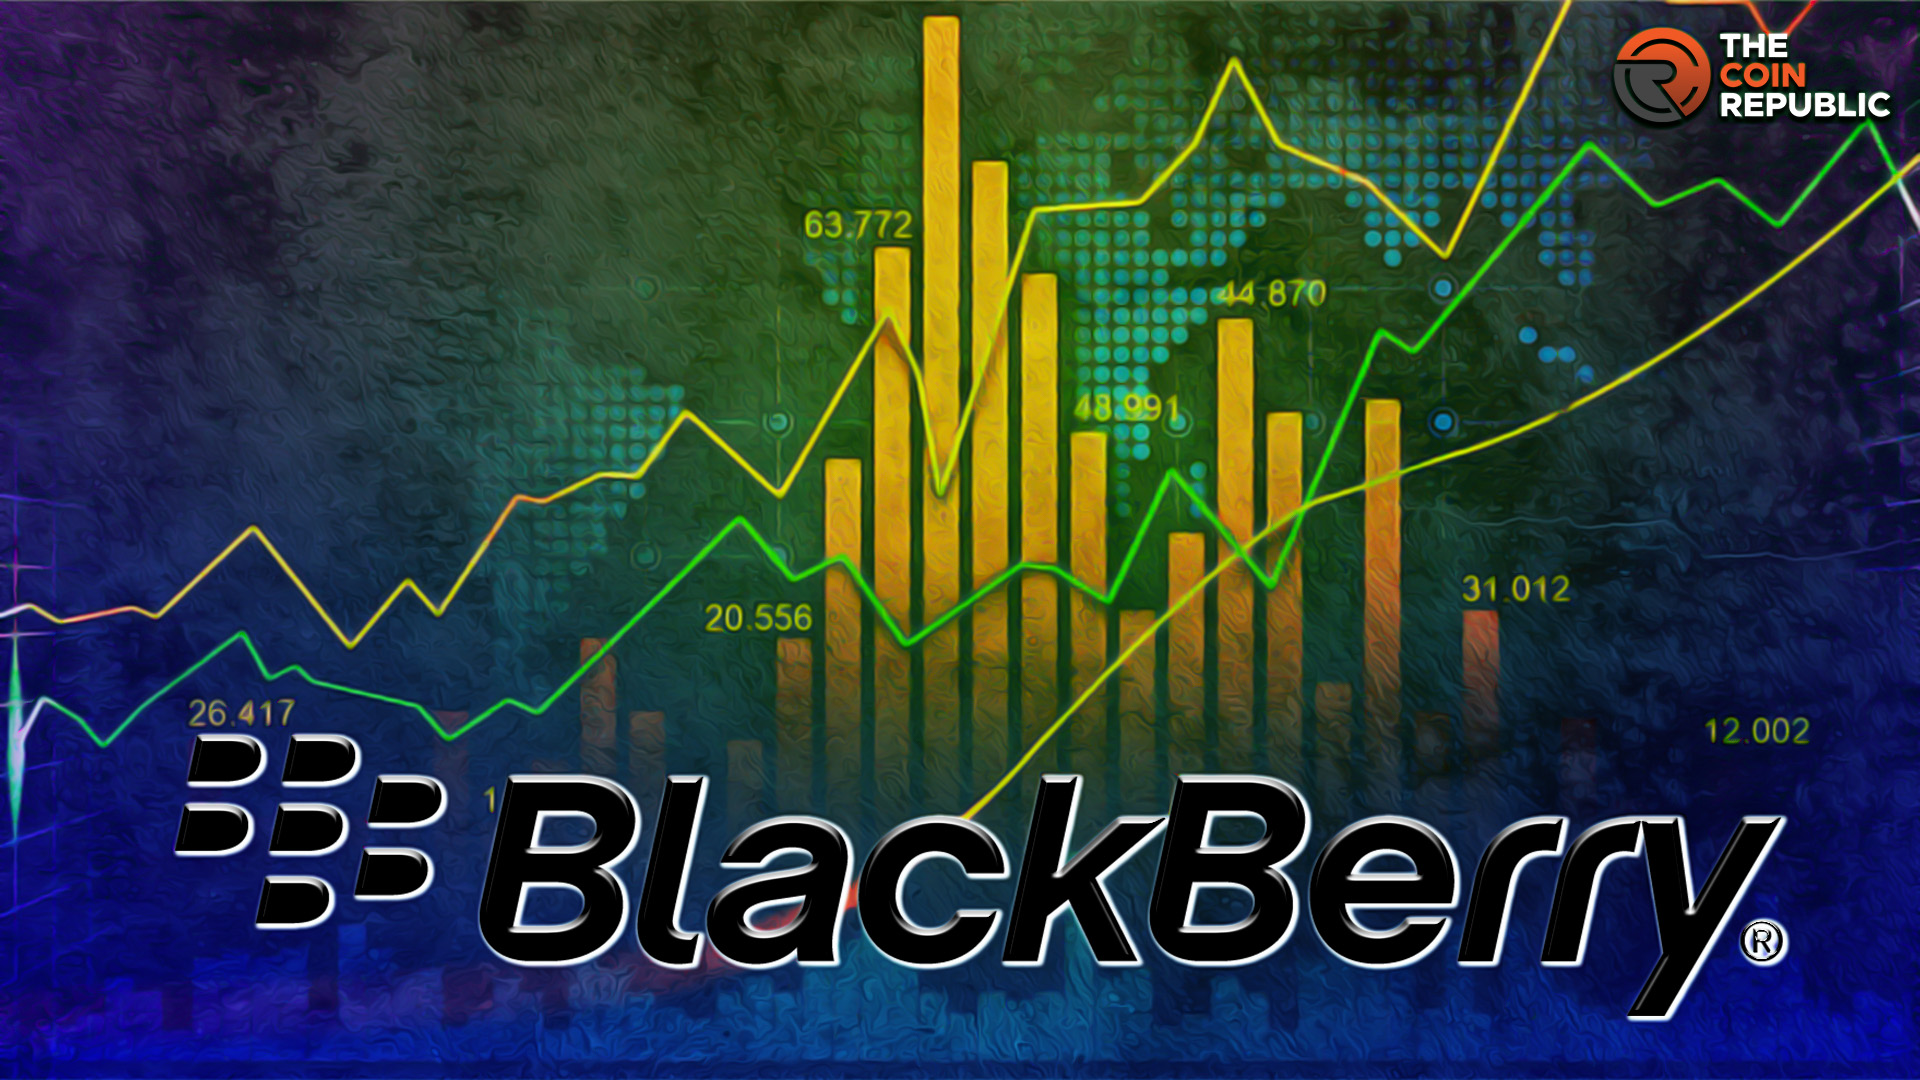 BlackBerry Ltd NYSE: BB Stock Price May Gain More in This Pattern